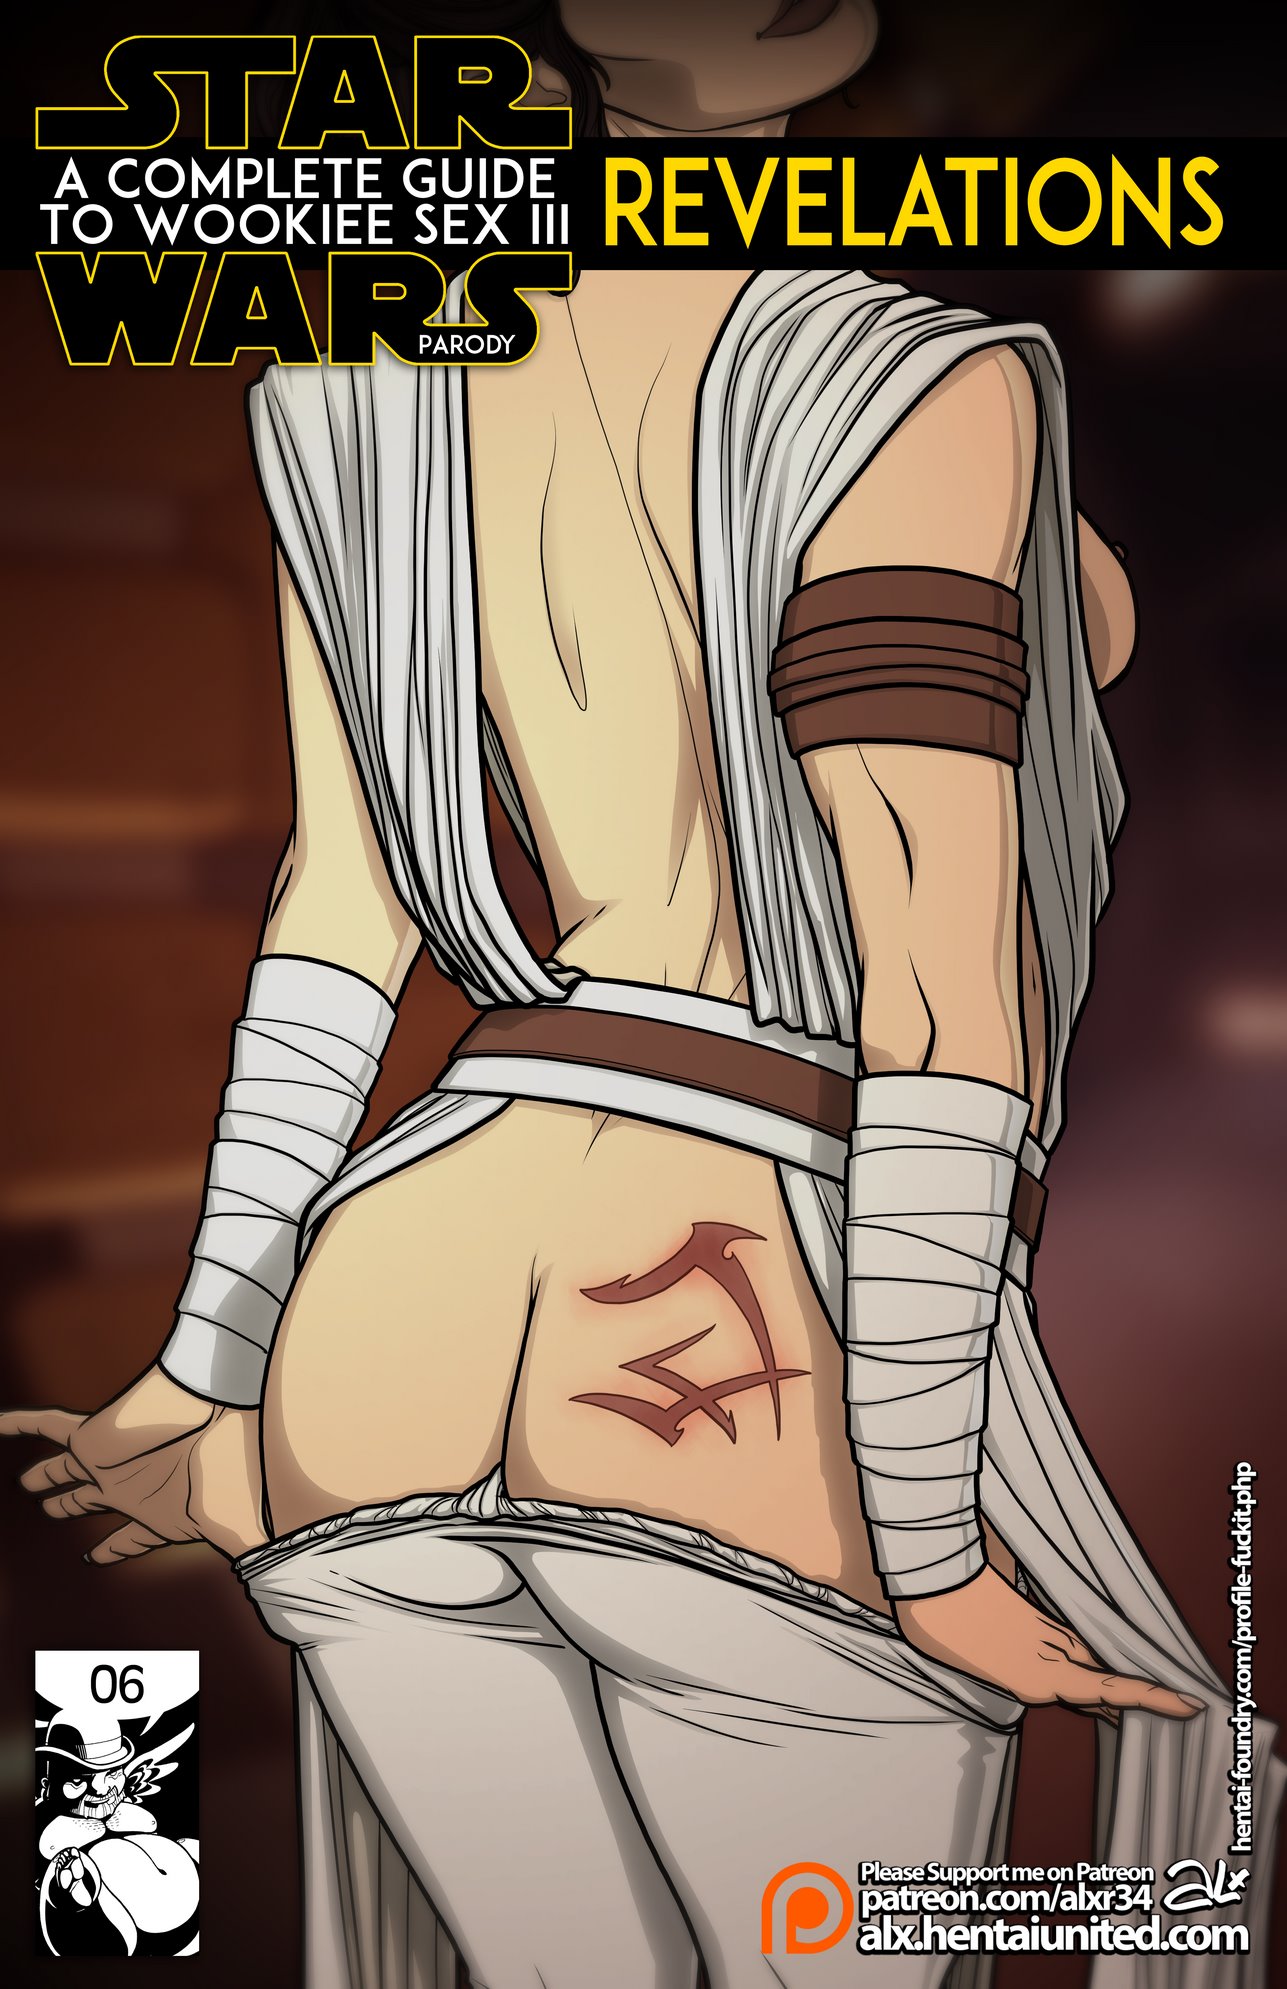 Star Wars Hd Porn - Alx) Star Wars: A Complete Guide to Wookie Sex III porn comic